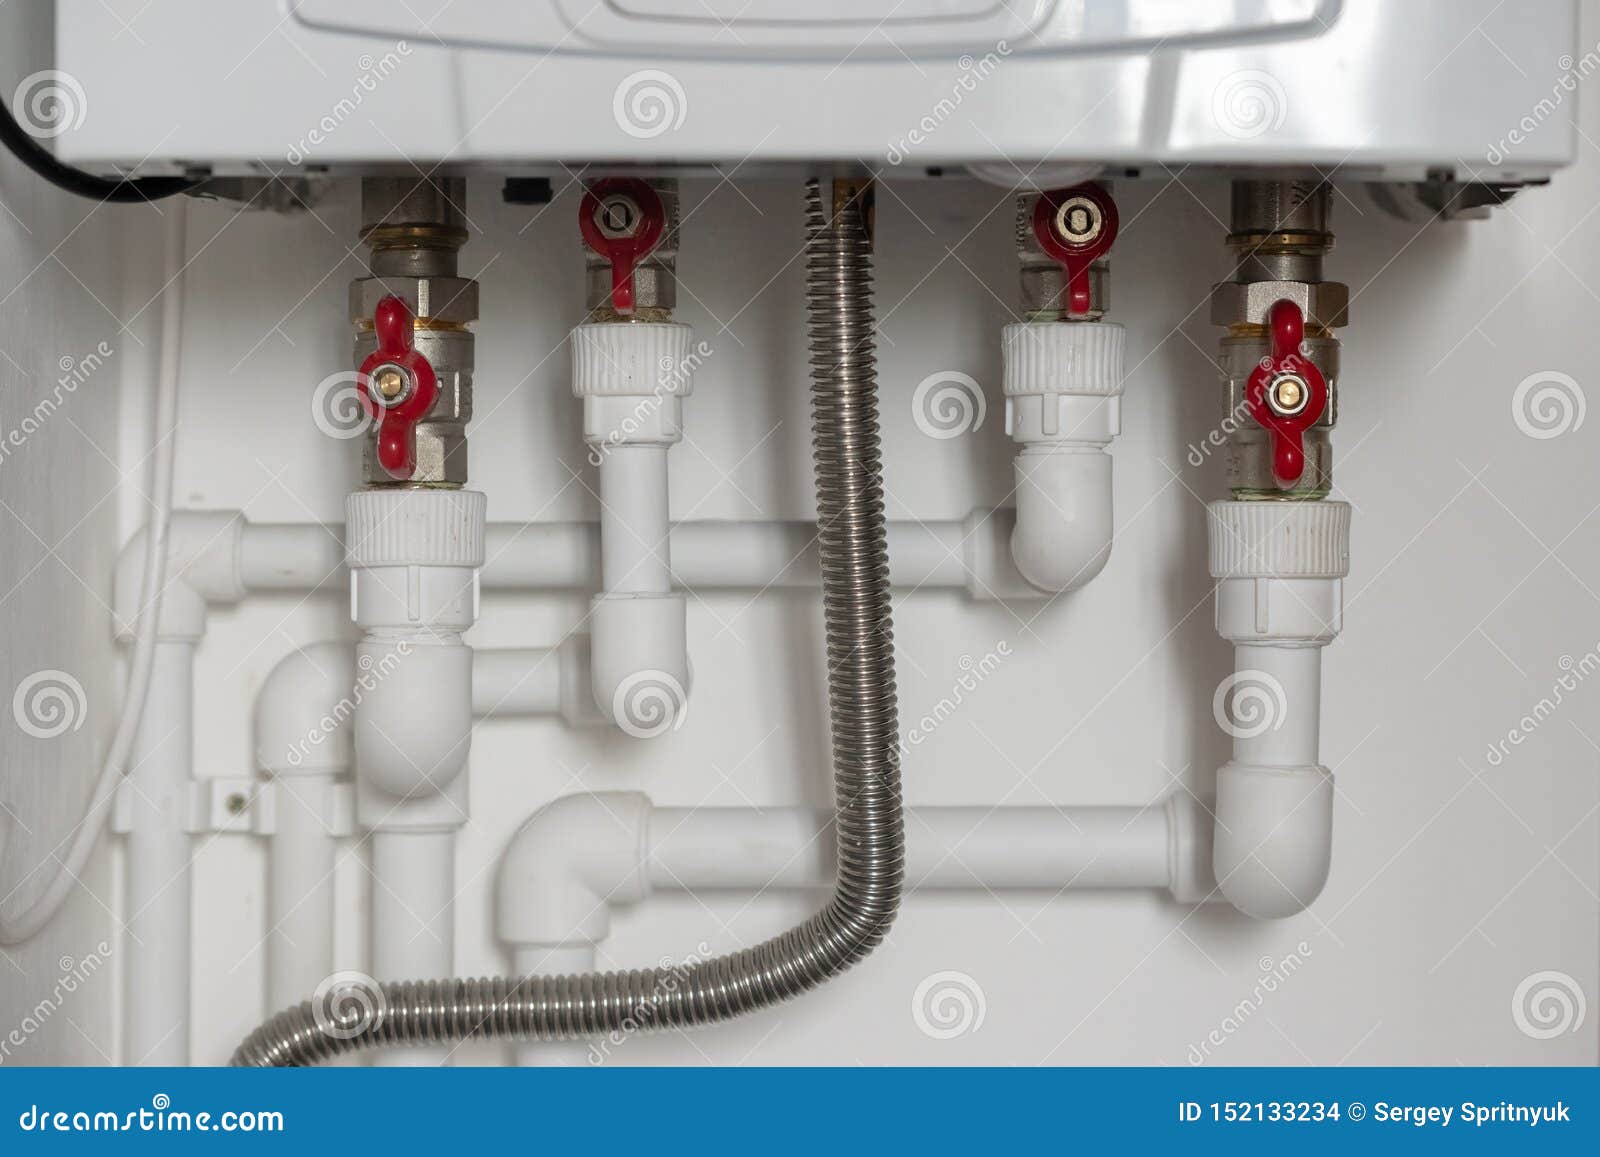 Wiring Of Plastic Pipes To The Water Heater In The Apartment Stock